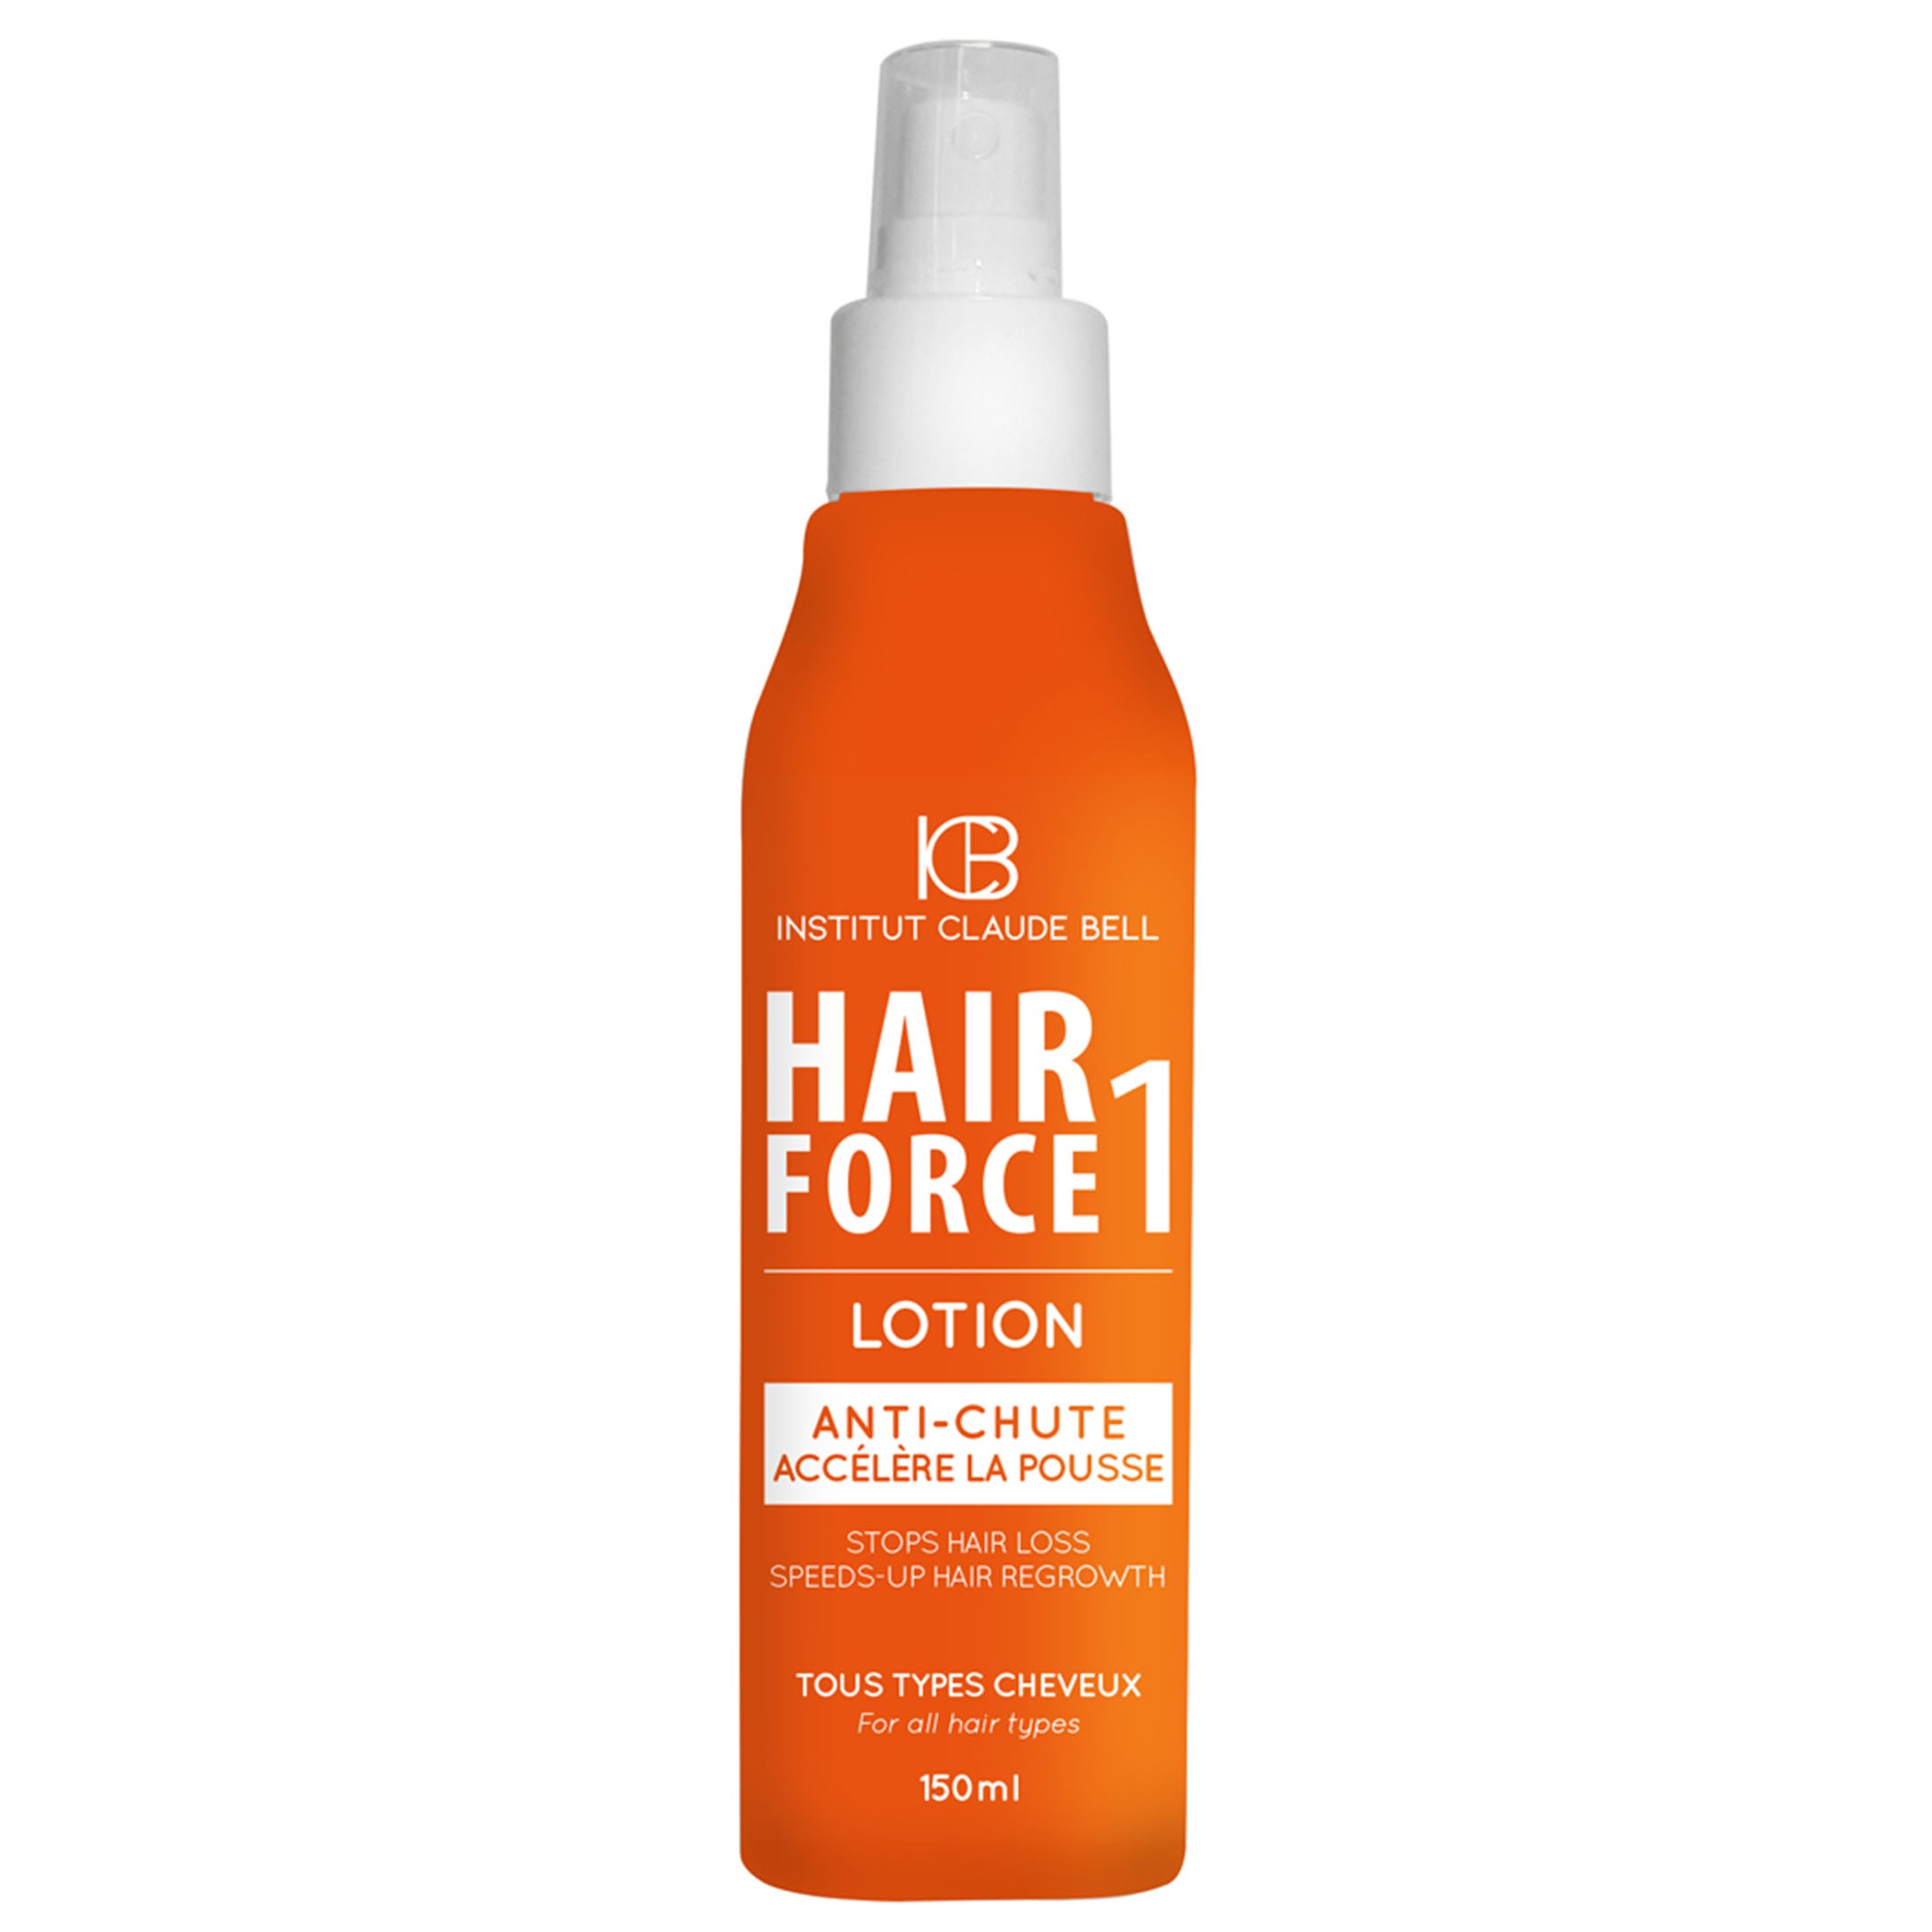 Institut Claude Bell Hair Force 1 Lotion - Anti-Hair Loss - 200 ml |  INDERWEAR